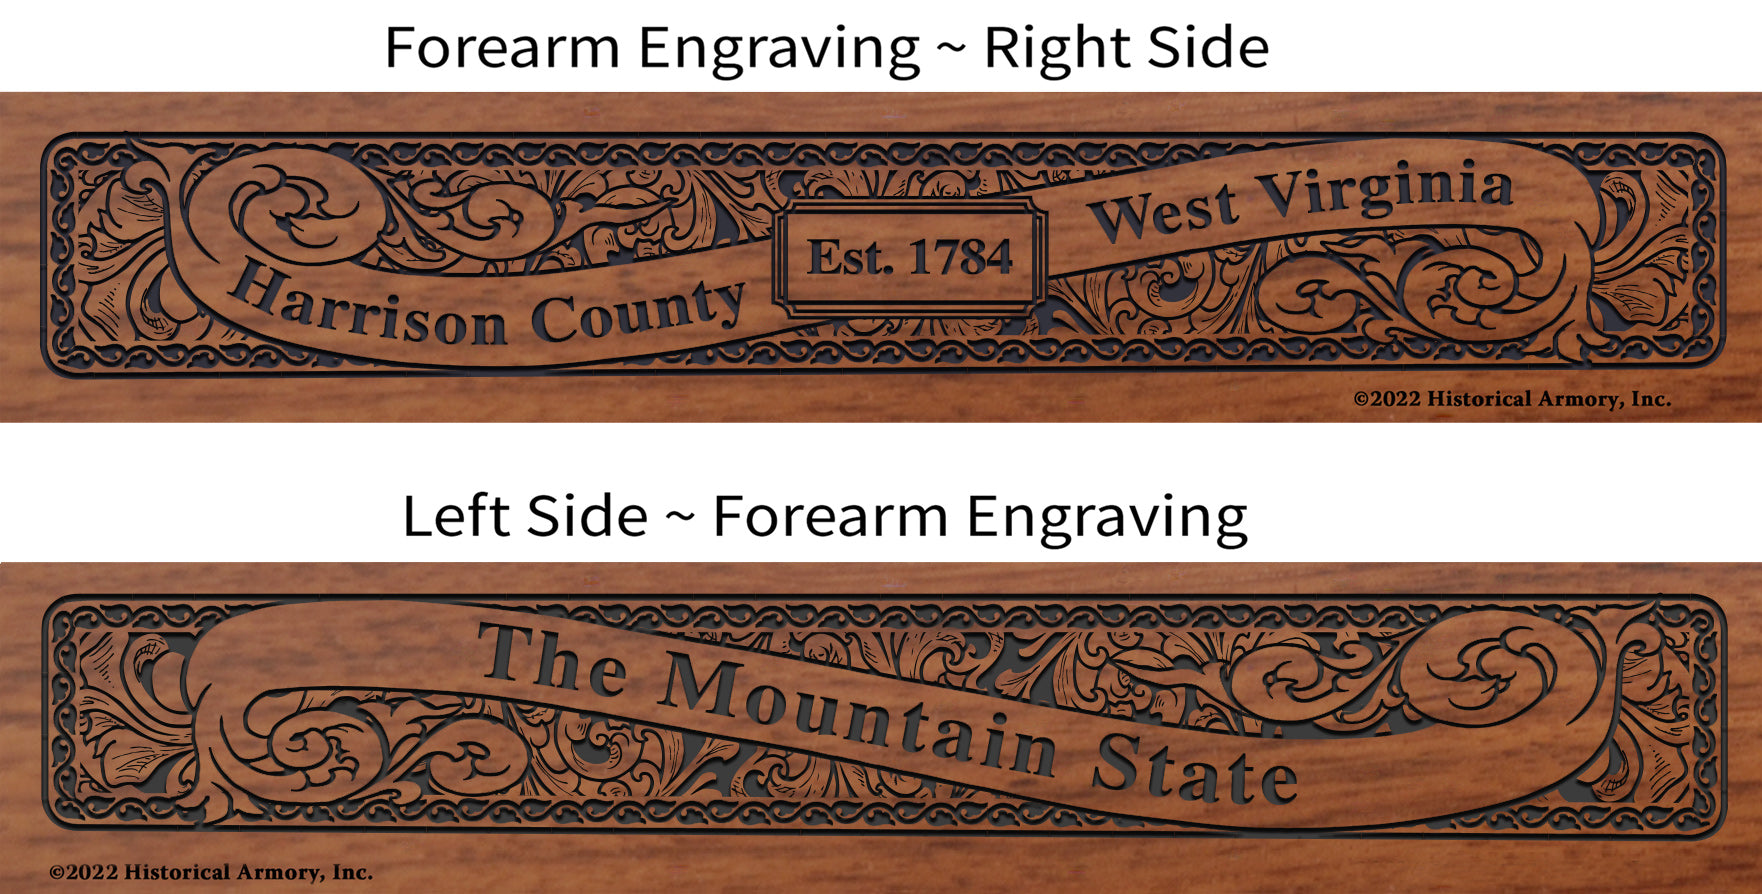 Harrison County West Virginia Engraved Rifle Forearm